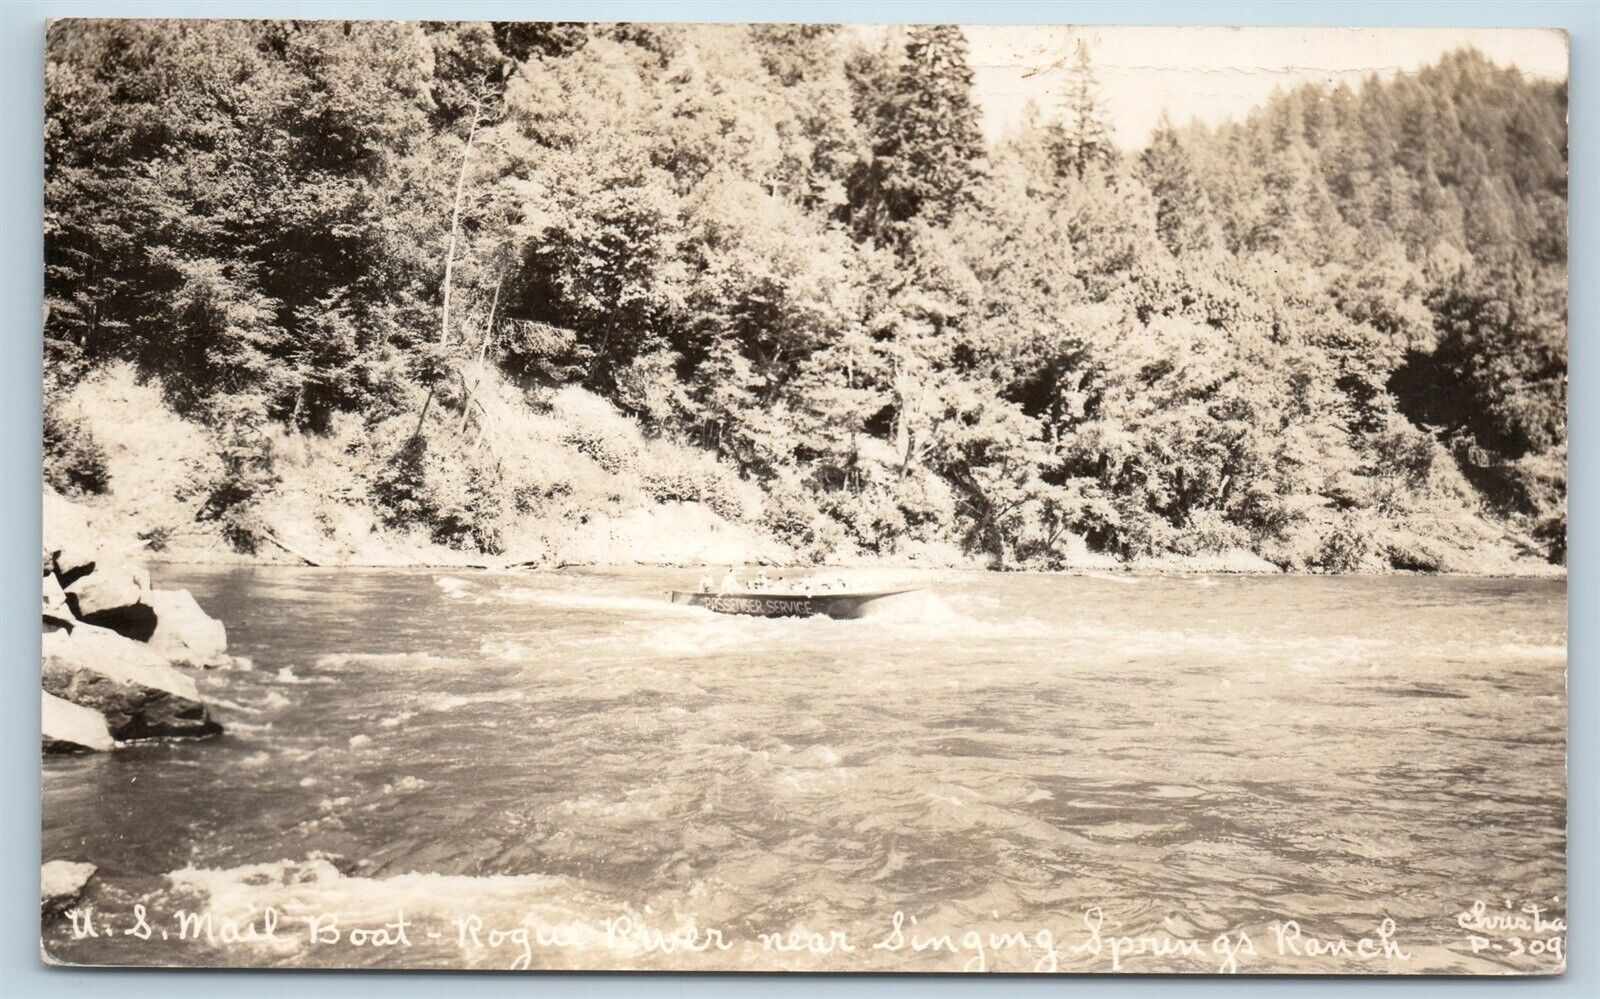 Postcard OR US Mail Boat on Rogue River Near Singing Springs Ranch RPPC Photo W5